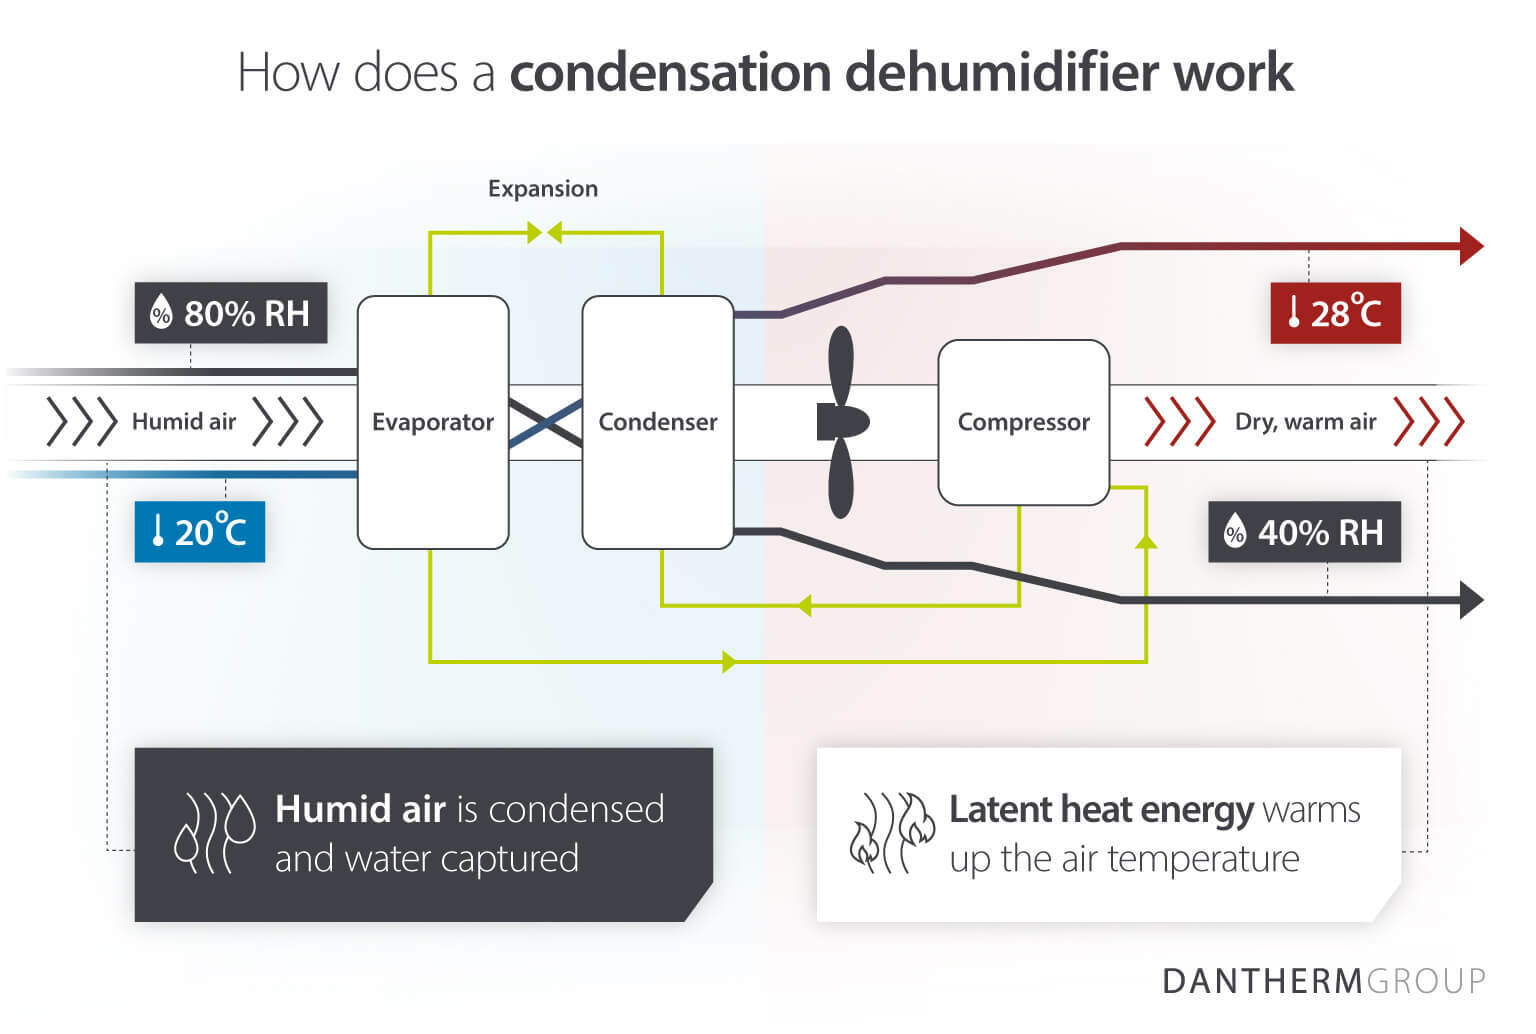 How does a condensation dehumidifier work